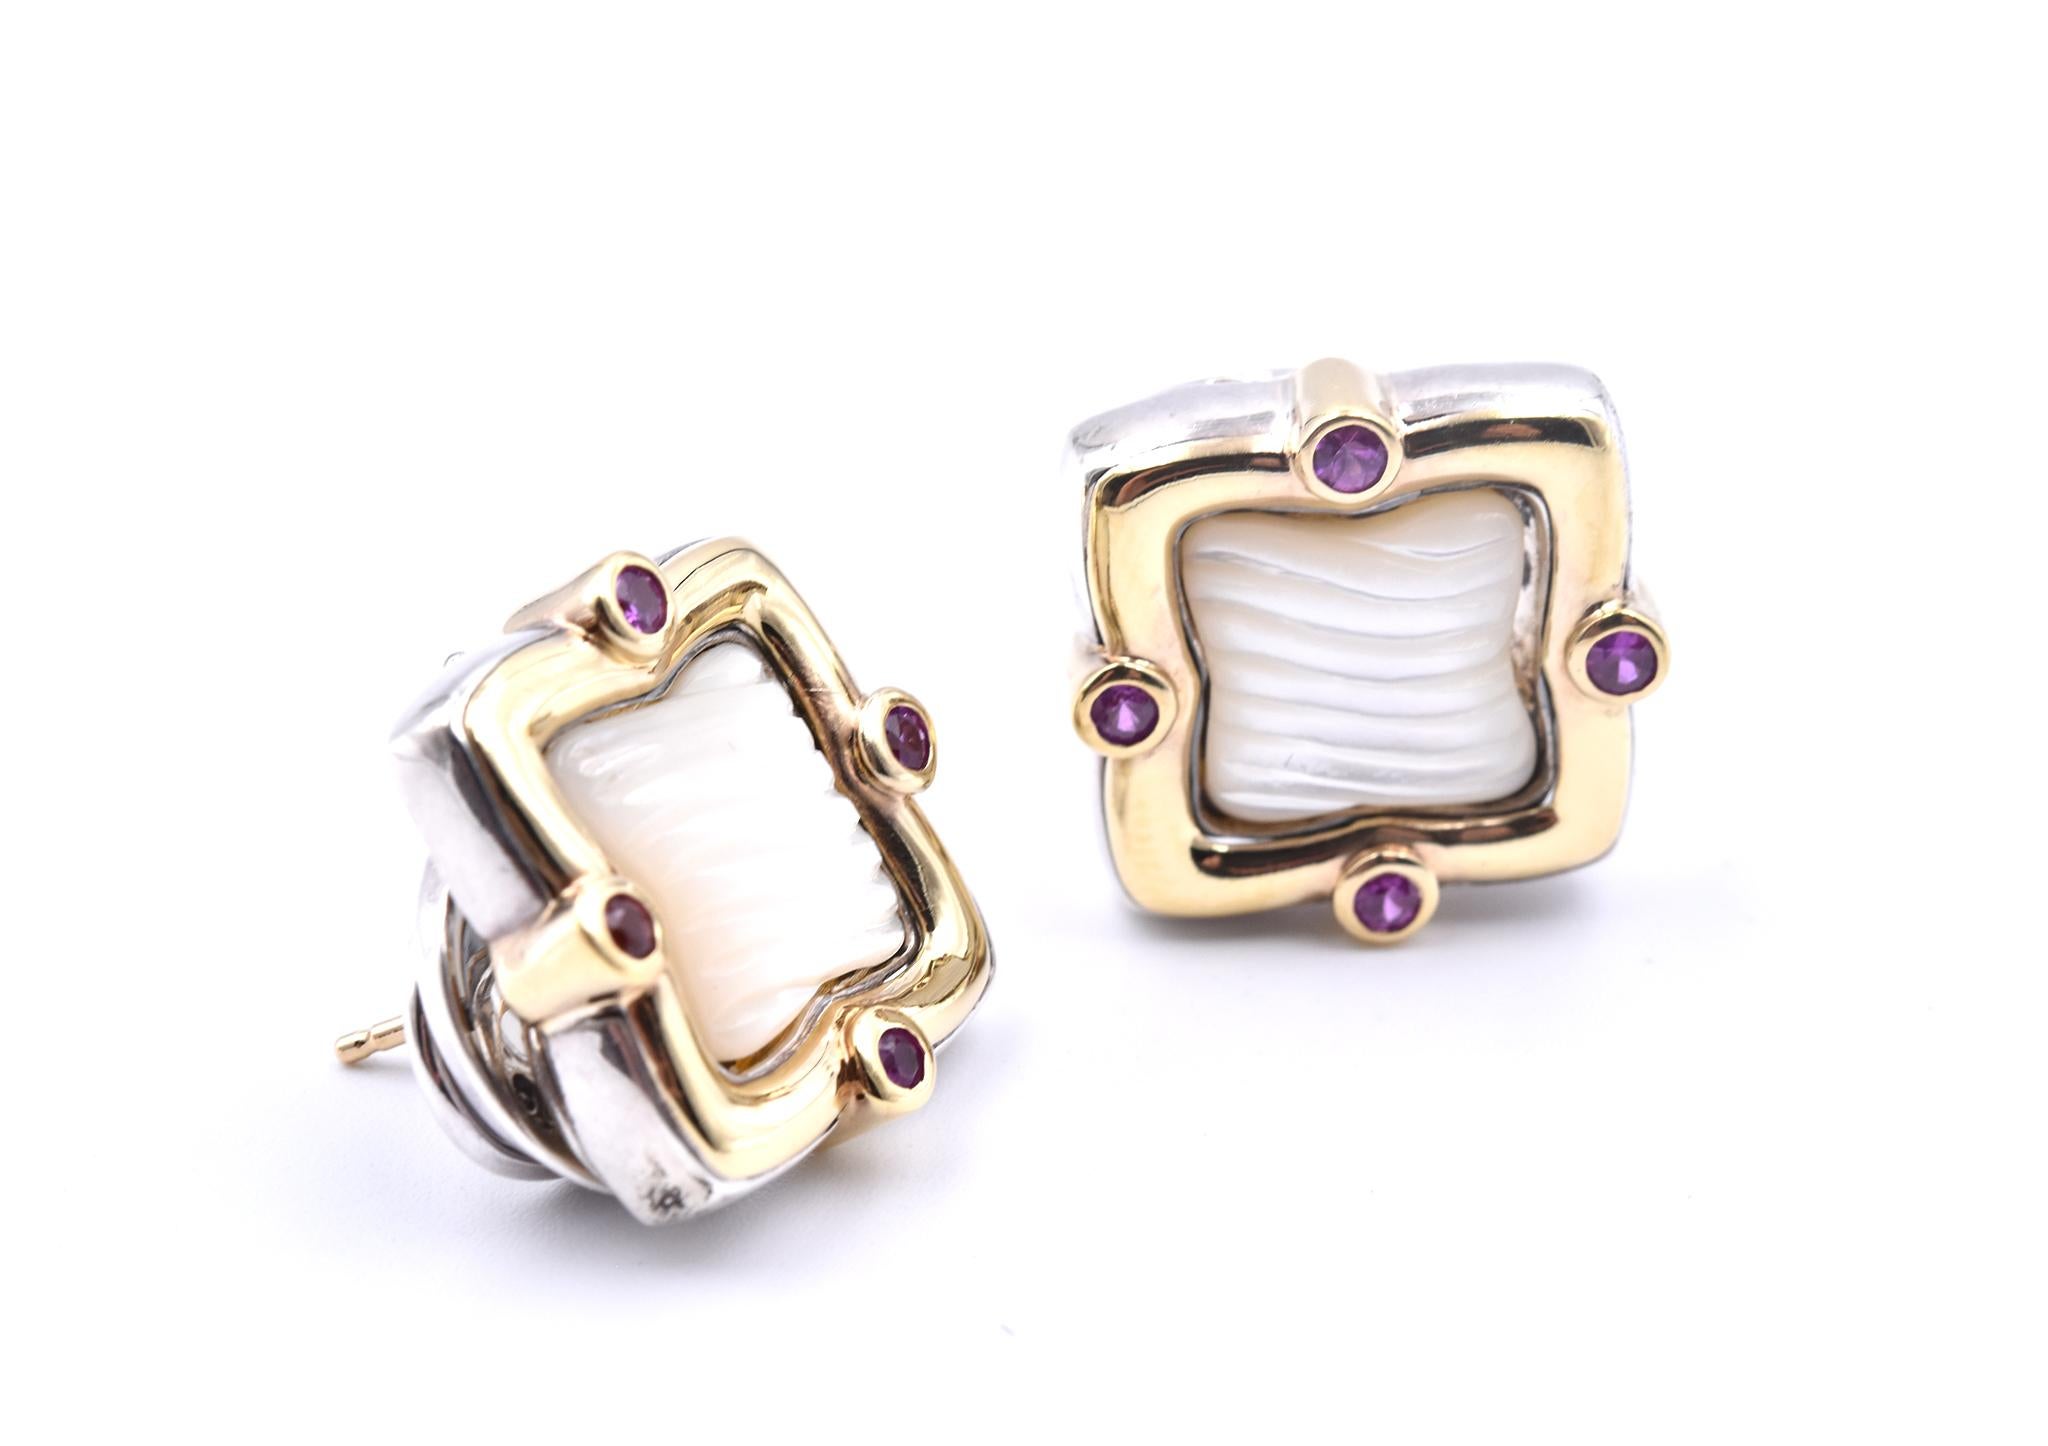 Designer: David Yurman
Material: 14k yellow gold and sterling silver
Fastenings: post with friction backs
Dimensions: earrings are 22.50mm by 22.50mm
Weight: 17.48 grams
